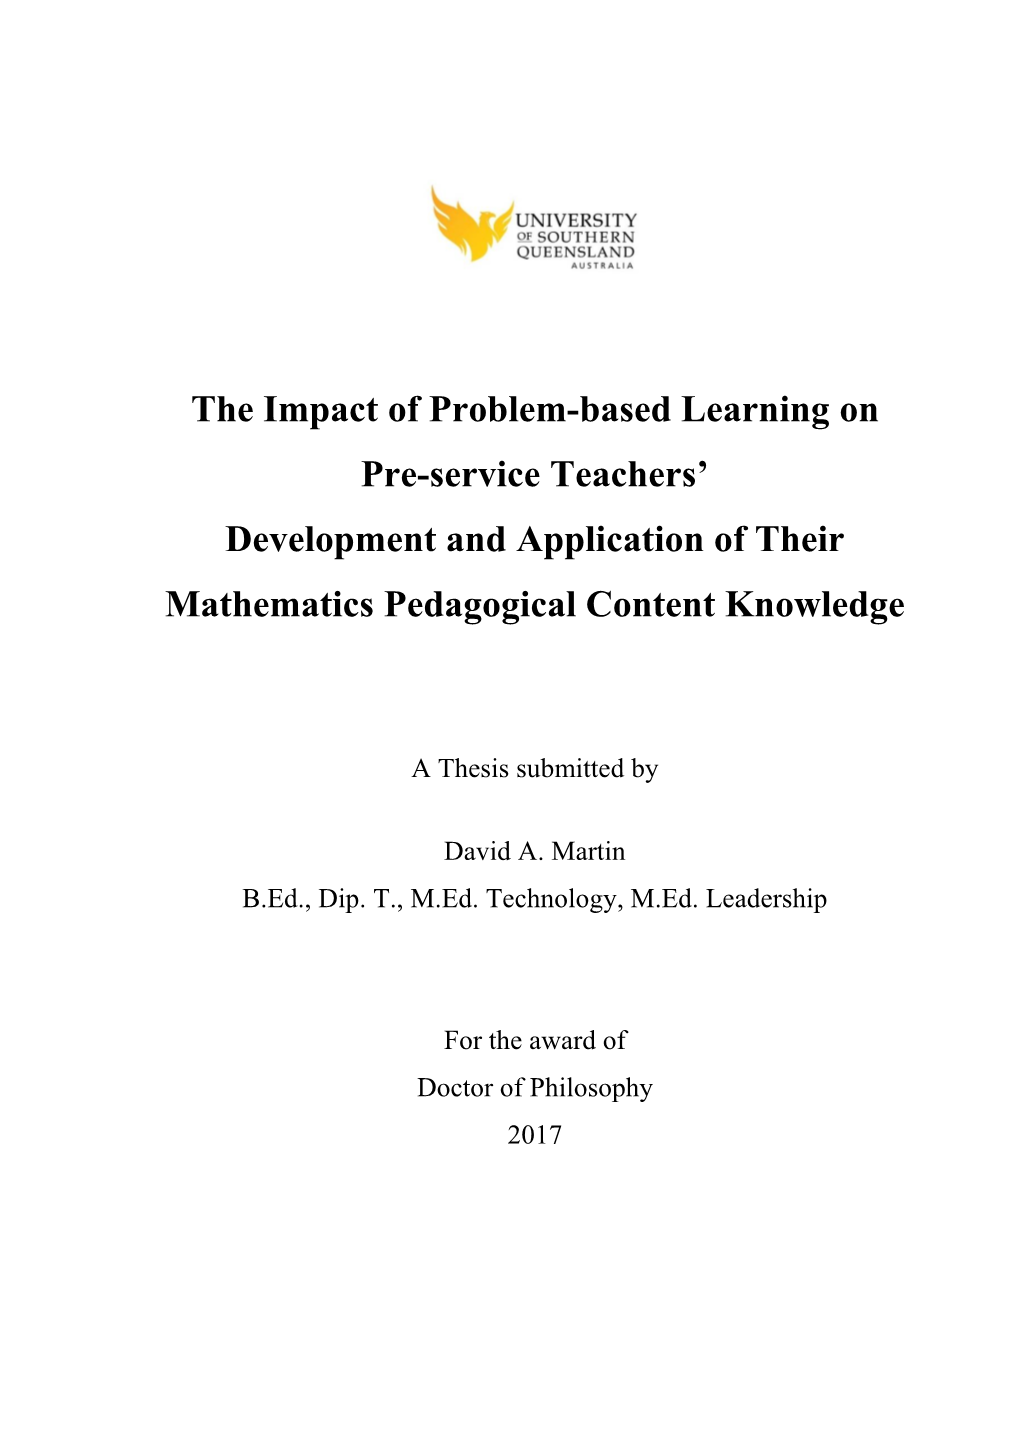 The Impact of Problem-Based Learning on Pre-Service Teachers’ Development and Application of Their Mathematics Pedagogical Content Knowledge